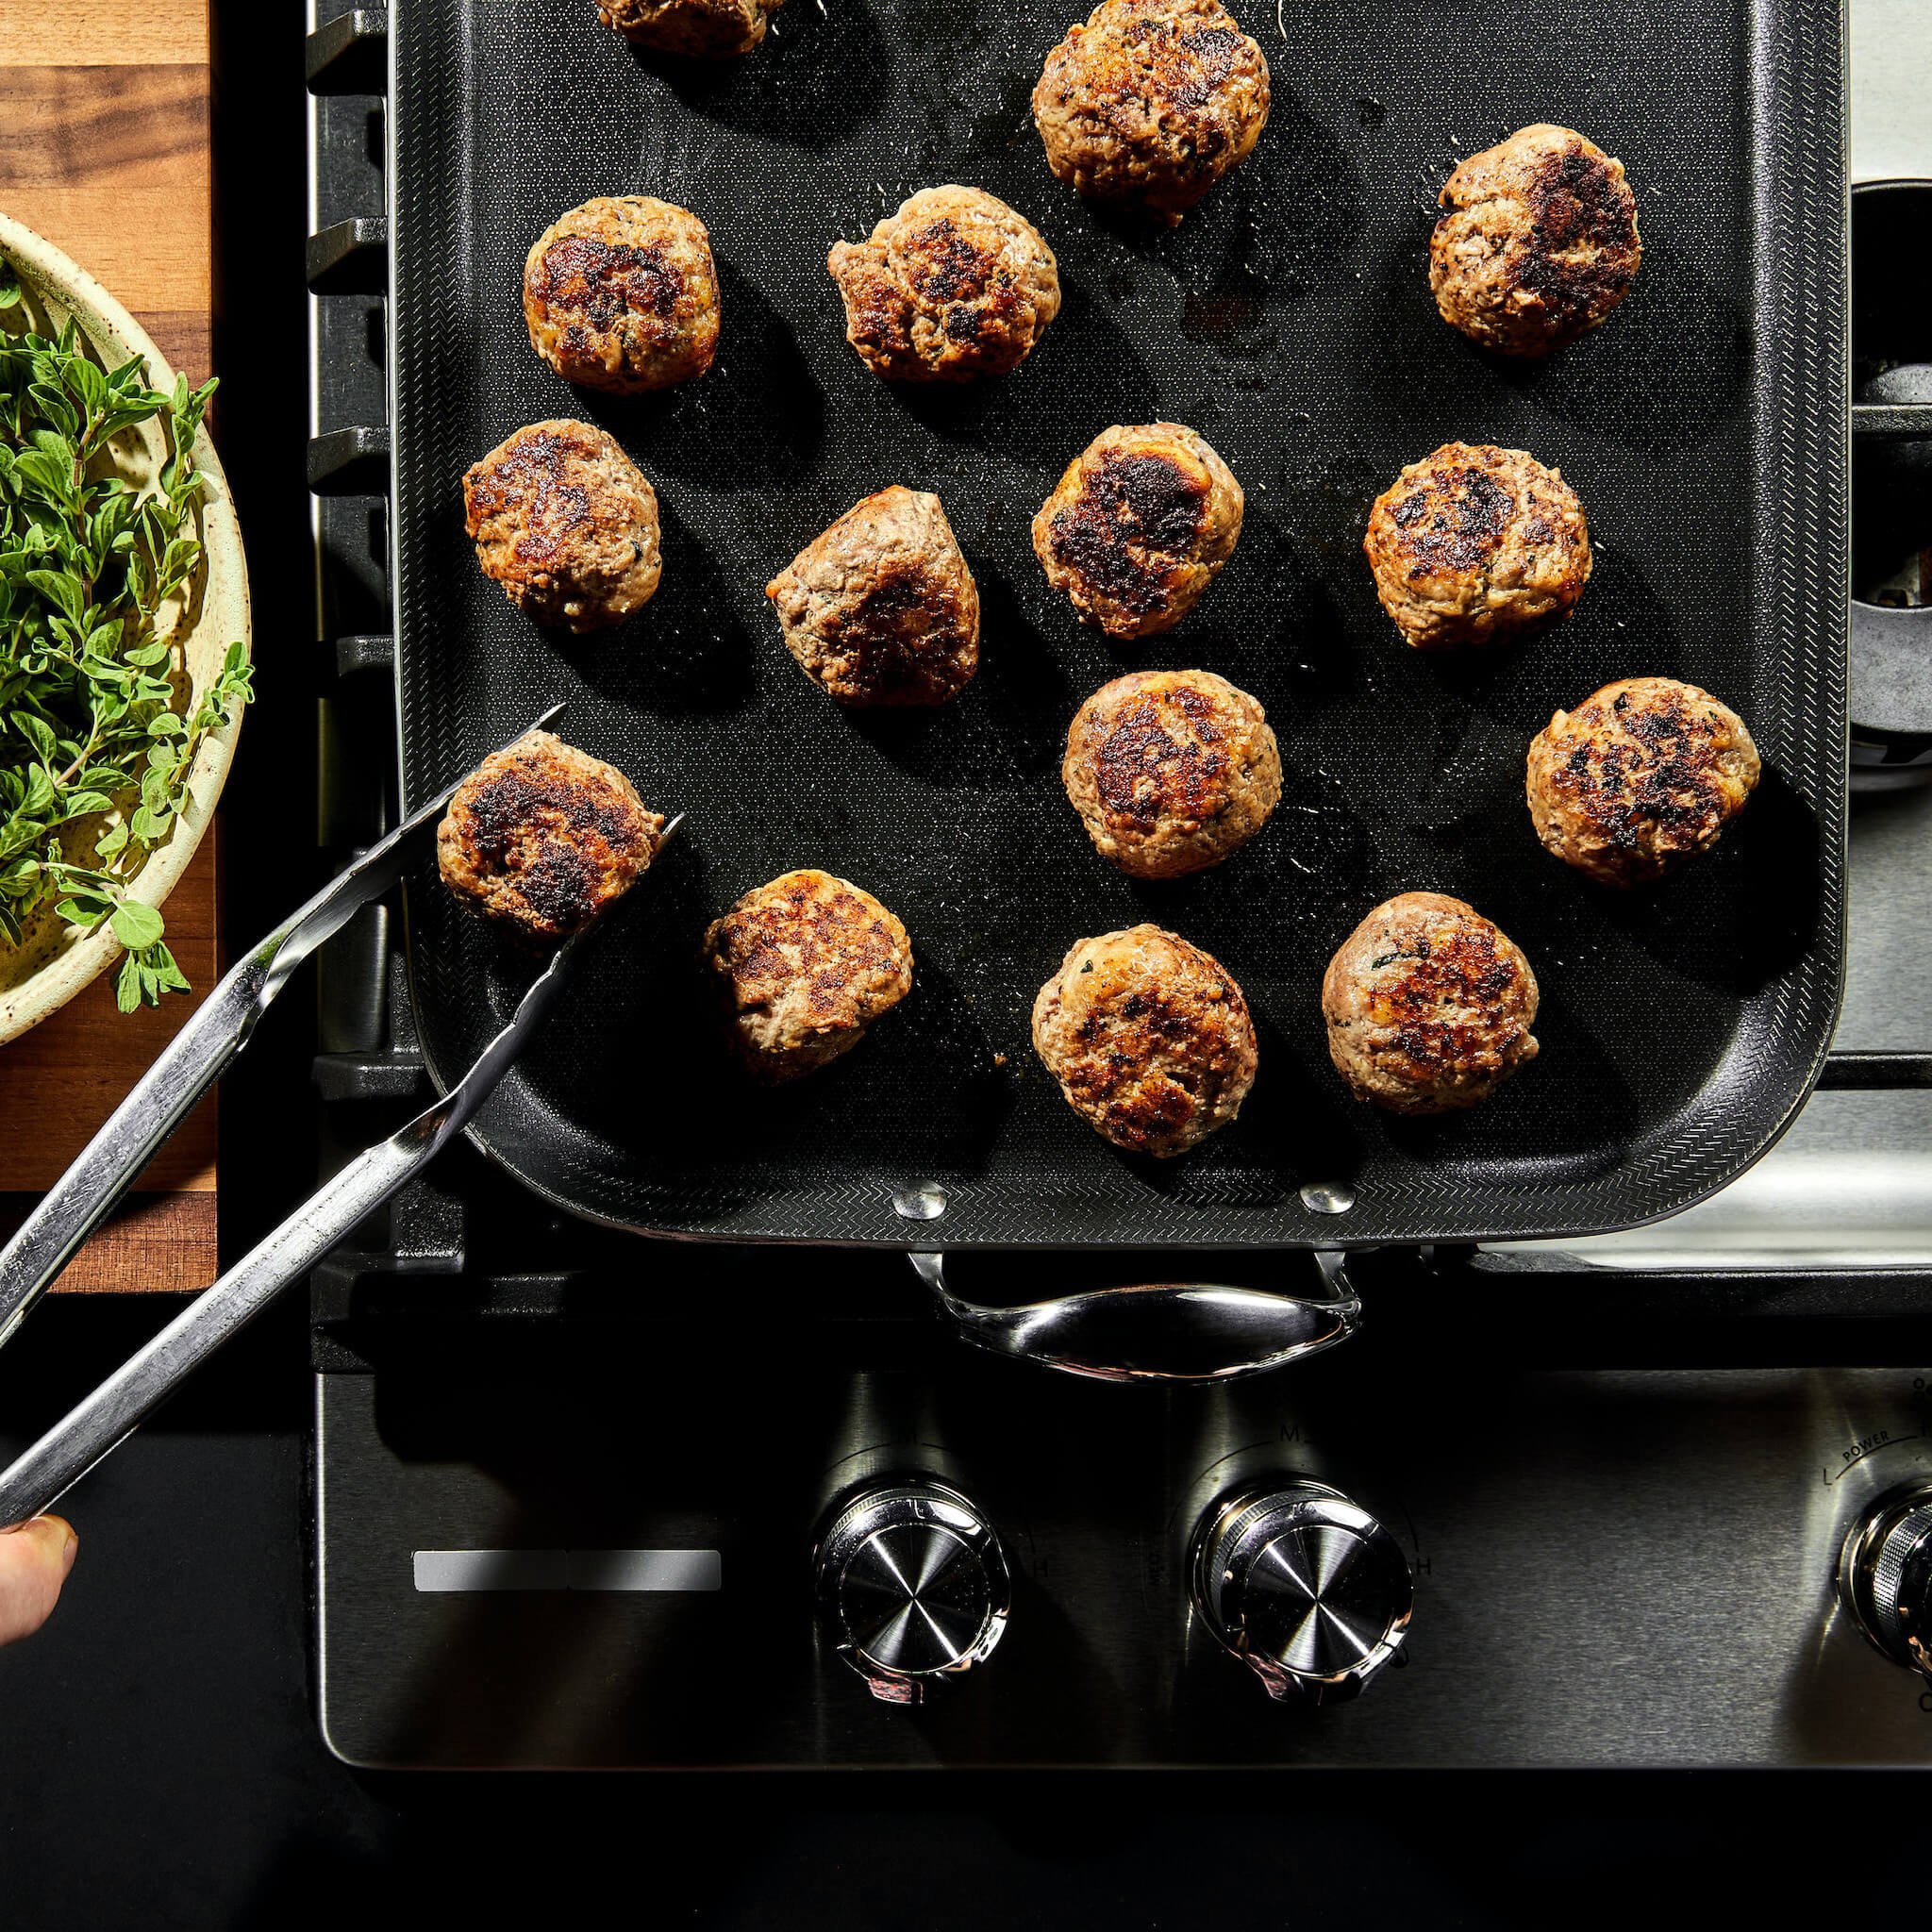 Deliciously seared meatballs on our Hybrid Double-Burner Griddle - the only tri-ply, hybrid griddle in the market. Perfect for large gatherings and meal prep with its consistent heating and superior browning capabilities.